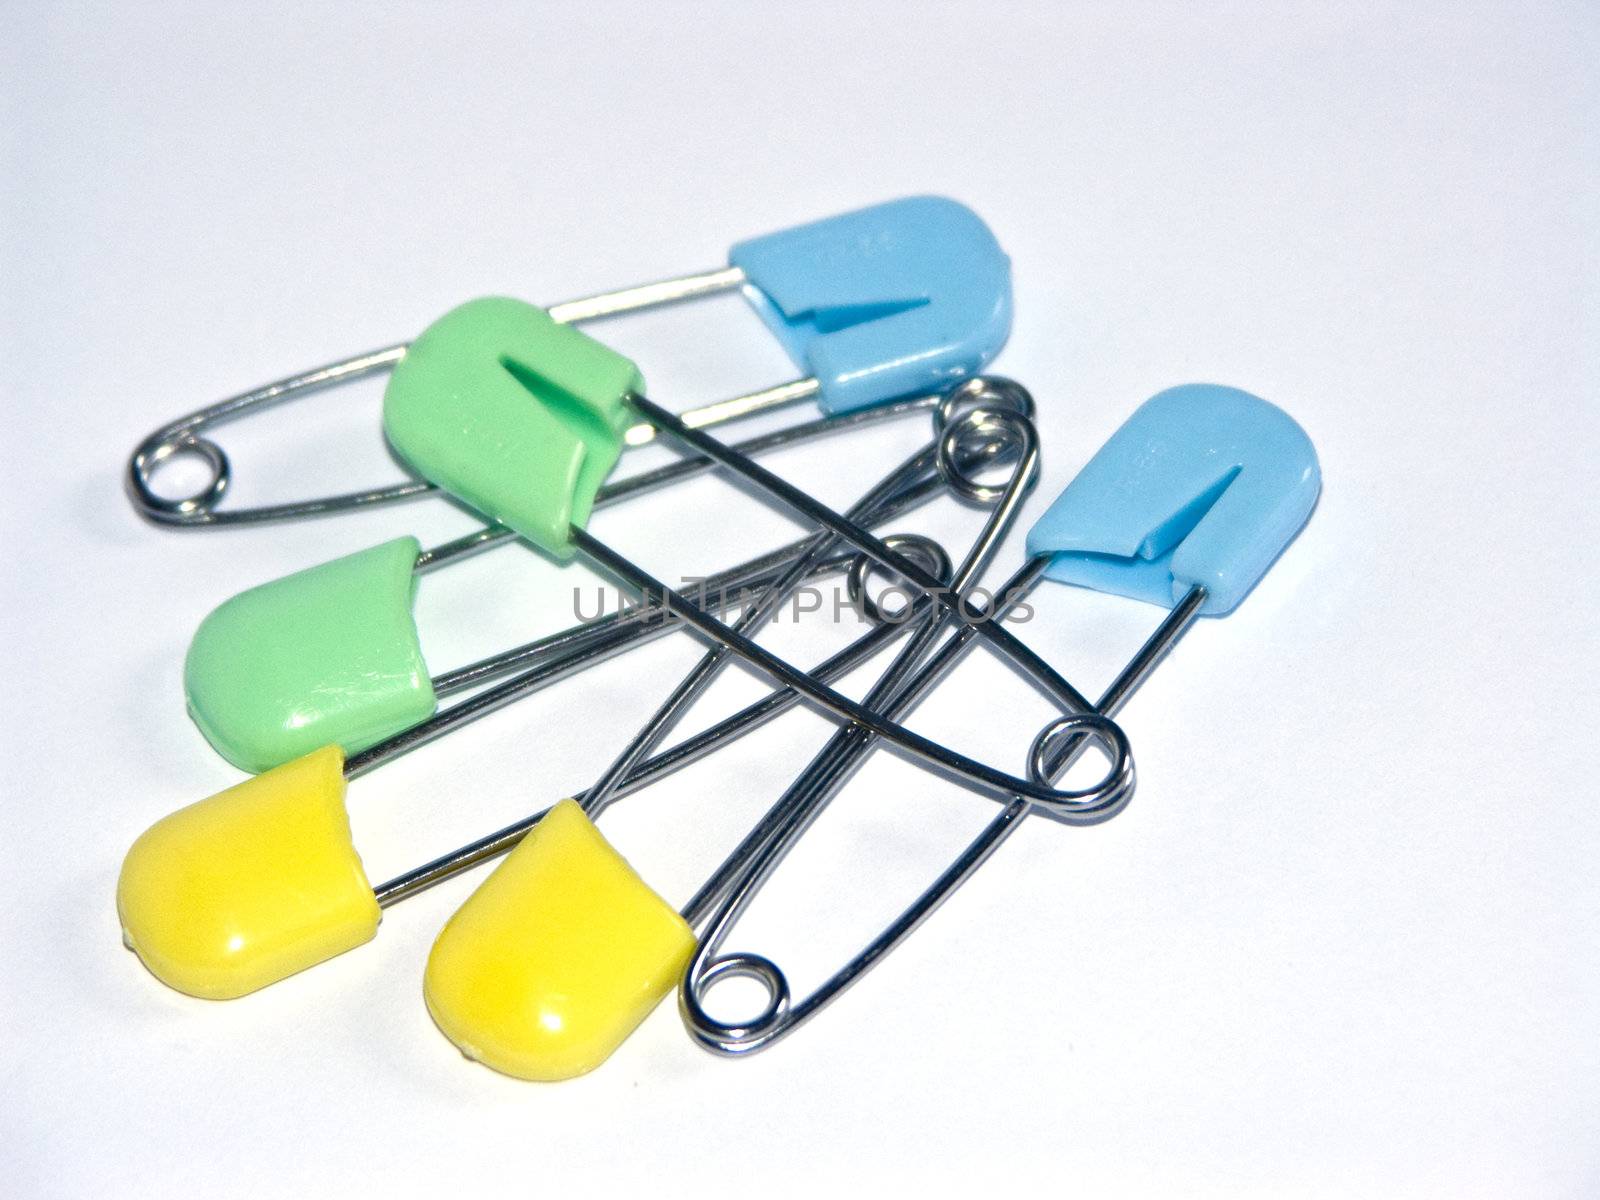 The image of six multi-coloured children's pins.